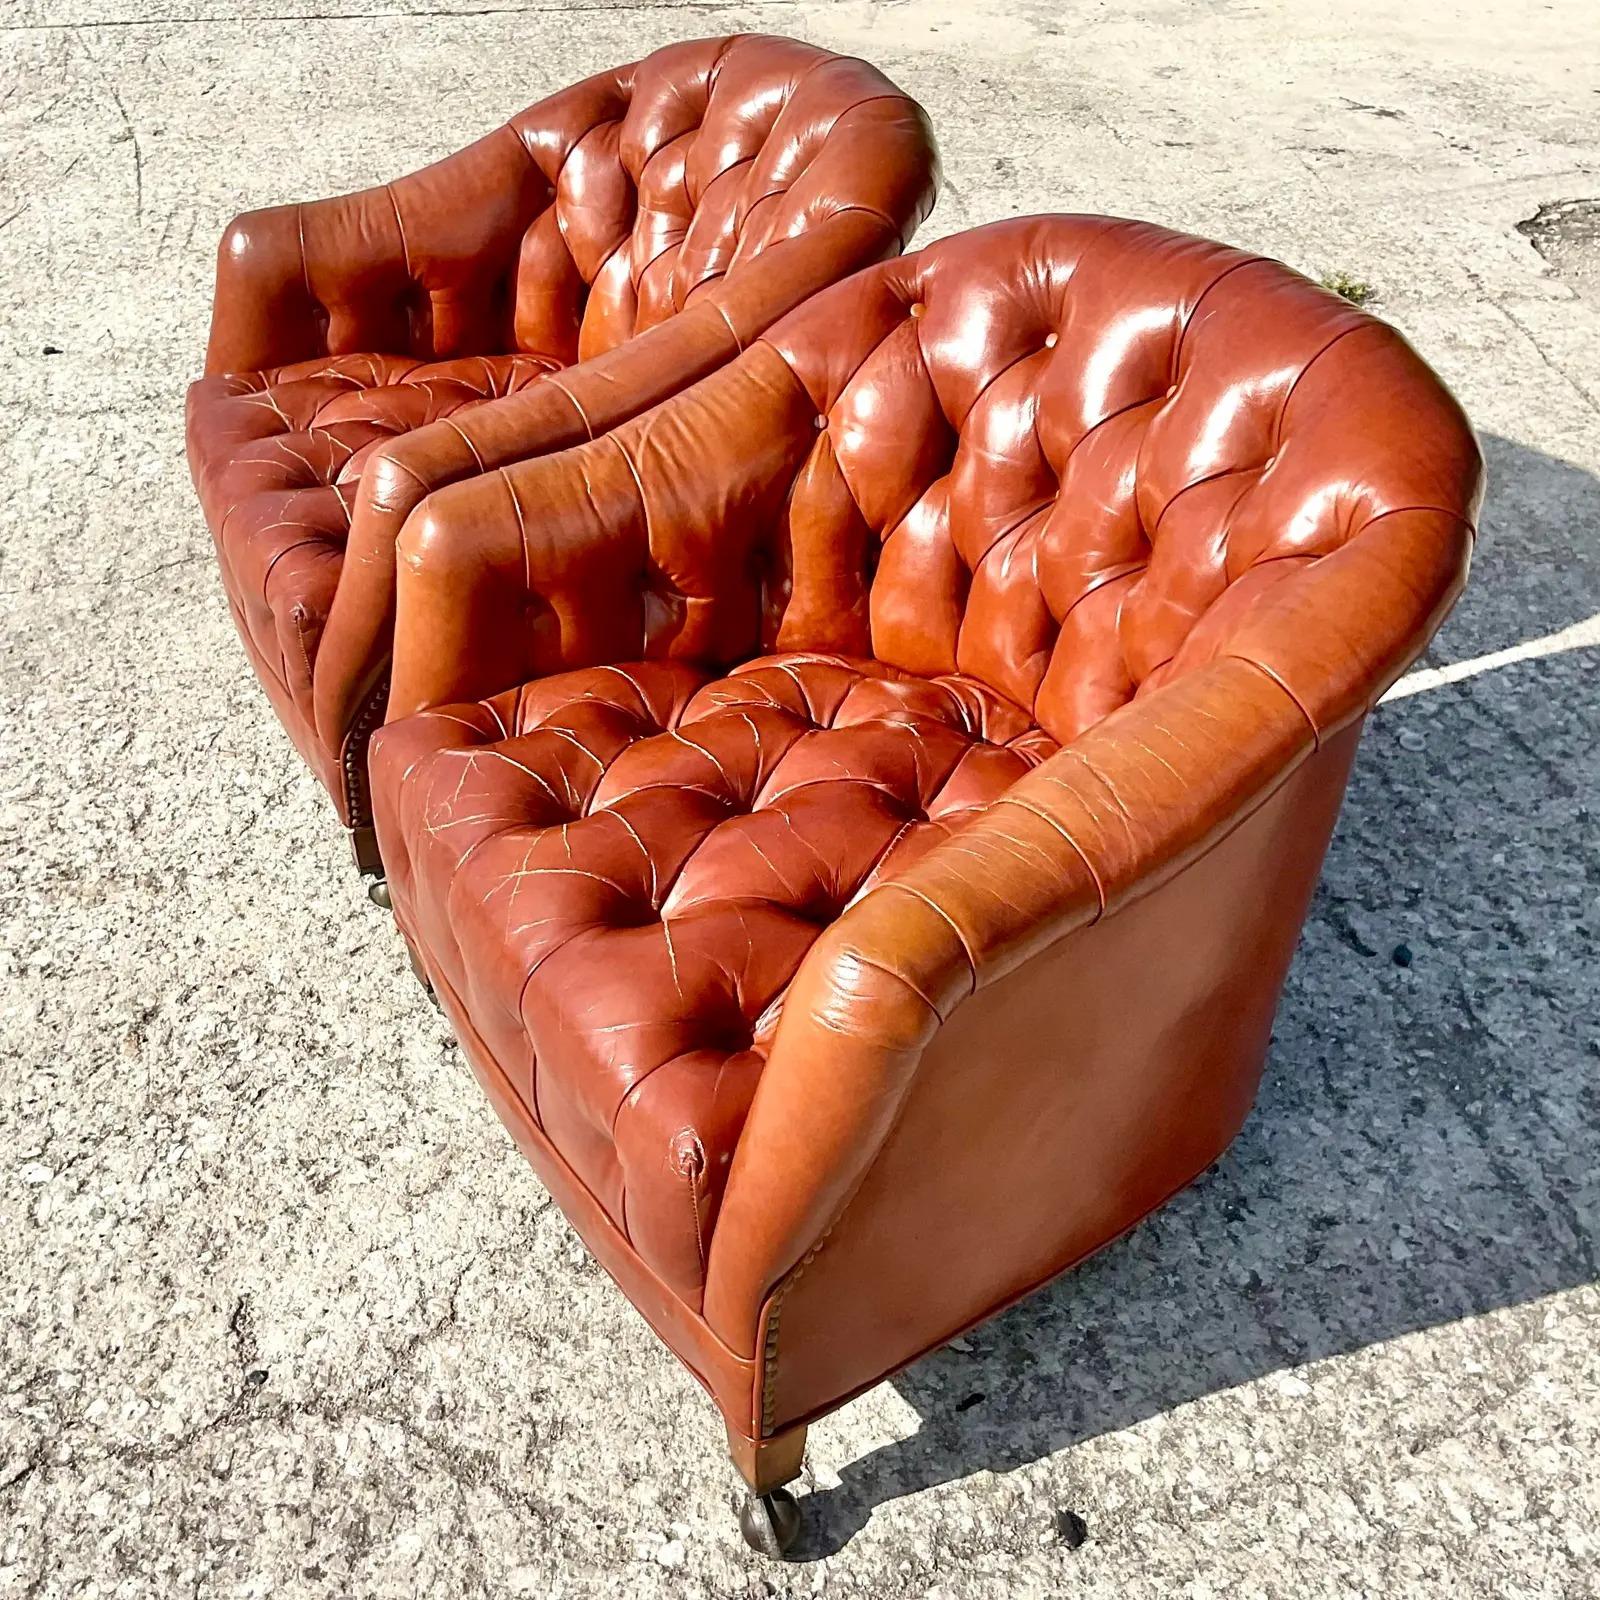 Fantastic pair of vintage Boho leather chairs. Beautiful tufted design on a tub shape. Casters on legs for easy movement. Marked on the bottom as property of The Bank of Palm Beach so they have some serious provenance. Acquired from a Palm Beach